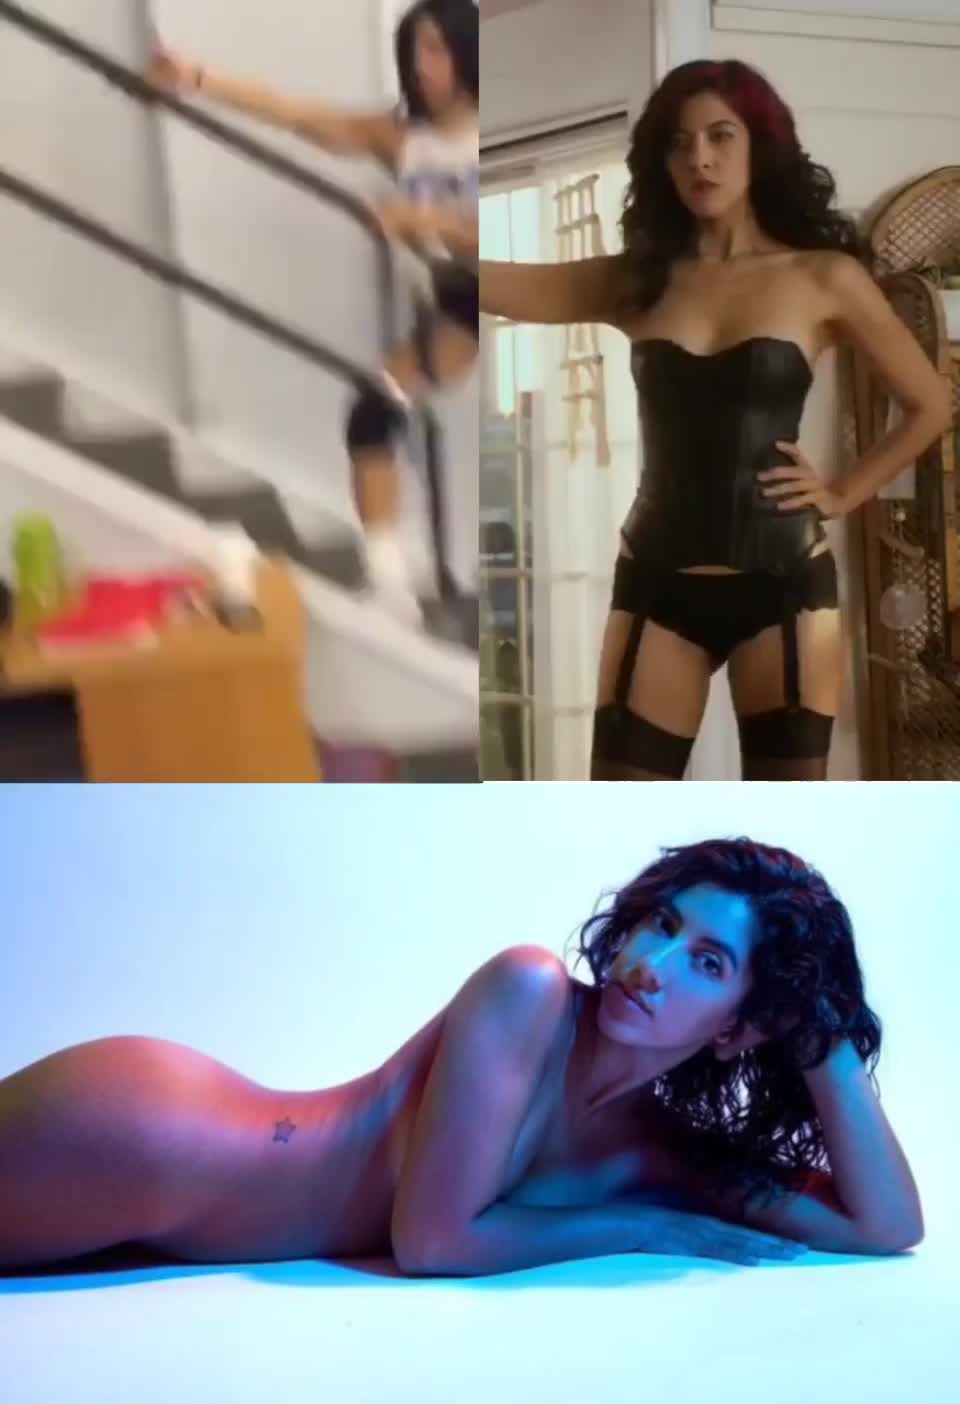 Hopefully we get to see Stephanie Beatriz's sexy ass on screen again soon : video clip